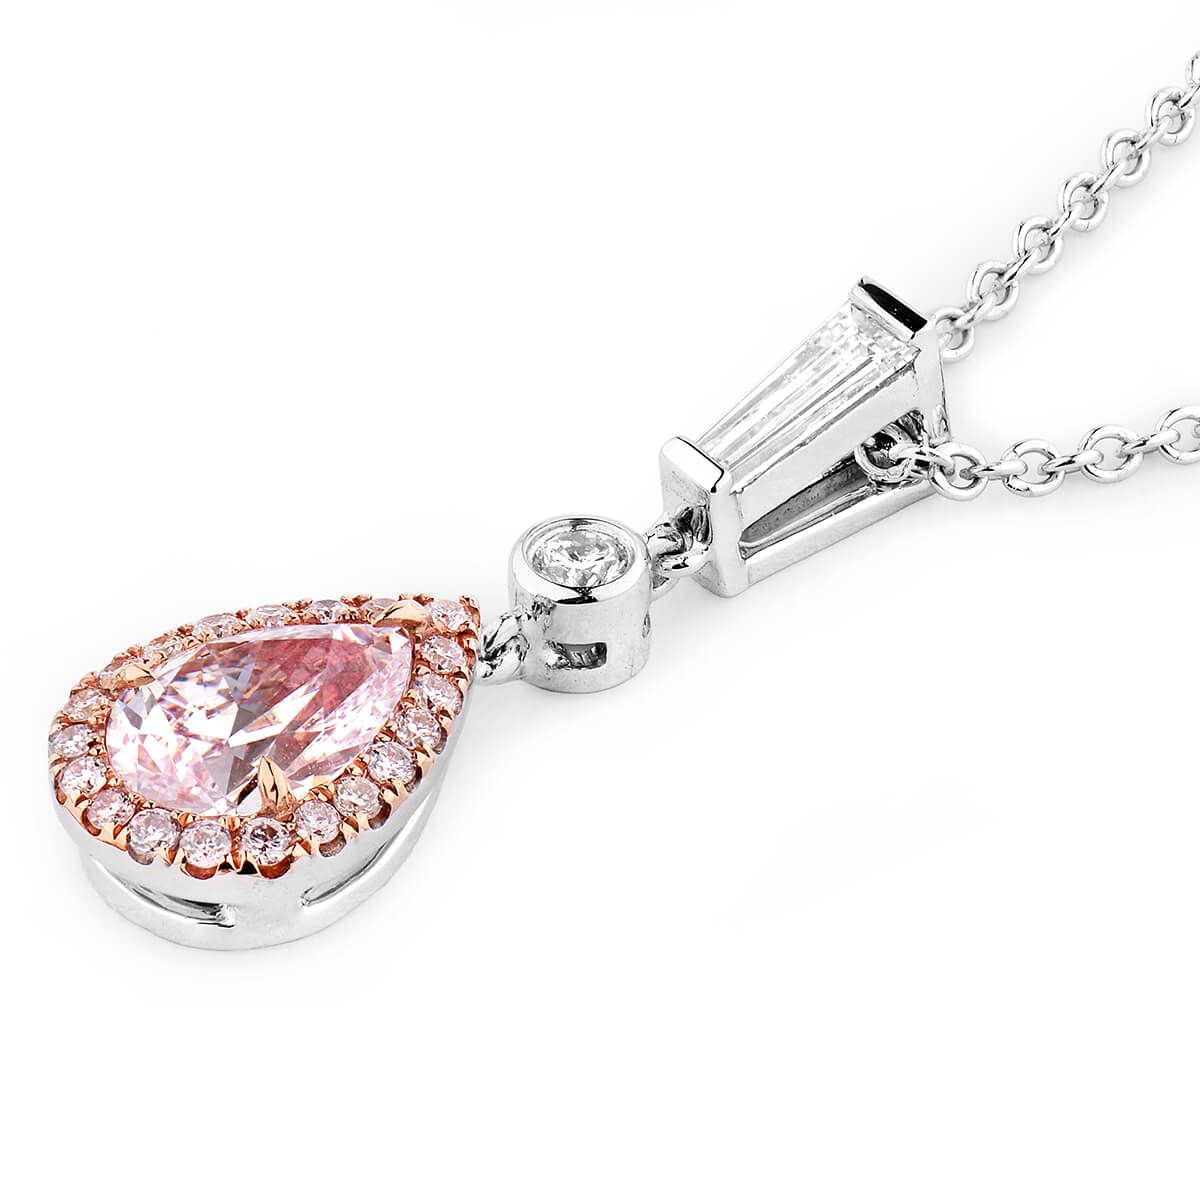 Very Light Pink Diamond Necklace, 0.70 Ct. TW, Pear shape, GIA Certified, 2195029005